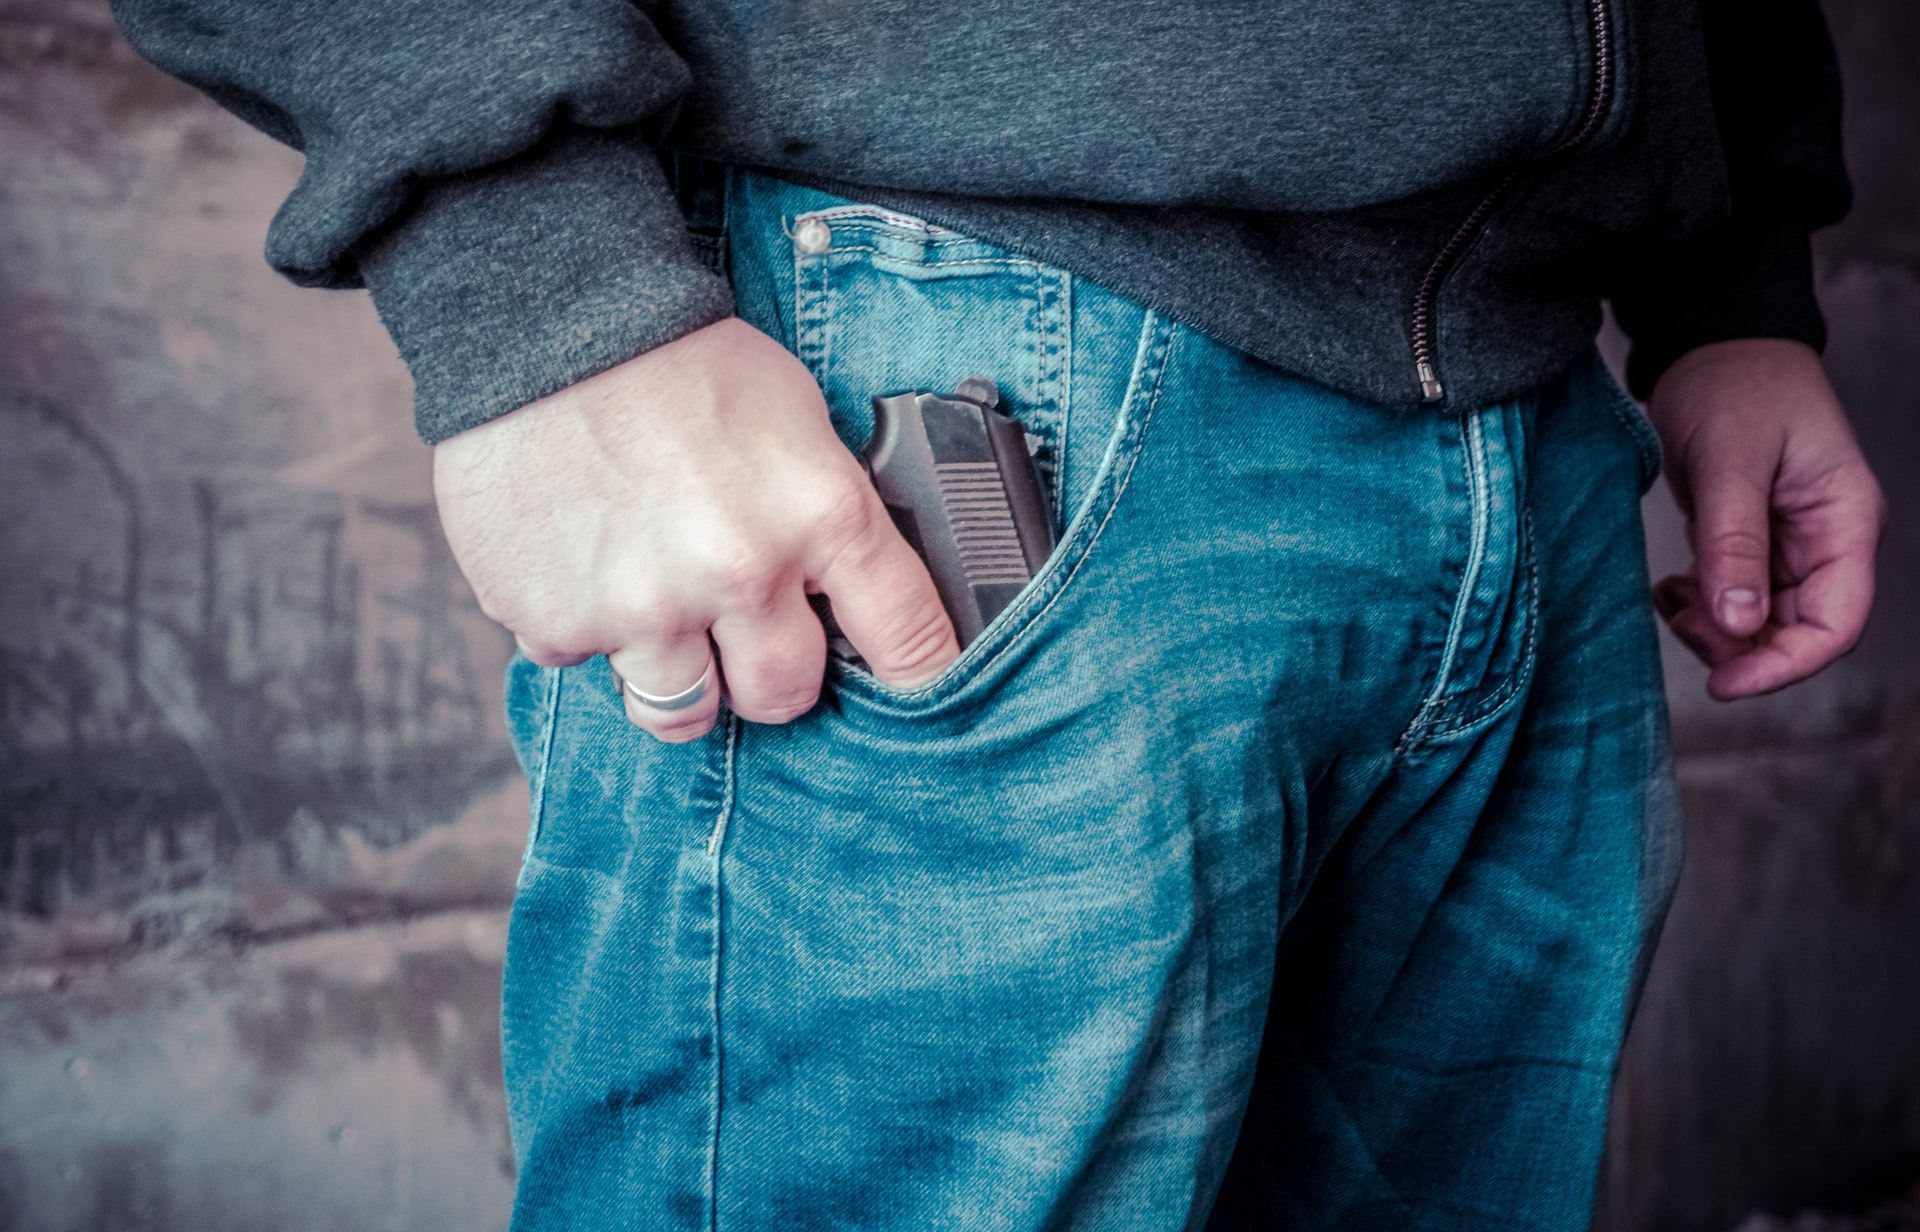 defensive display of a firearm - person showing gun in pocket